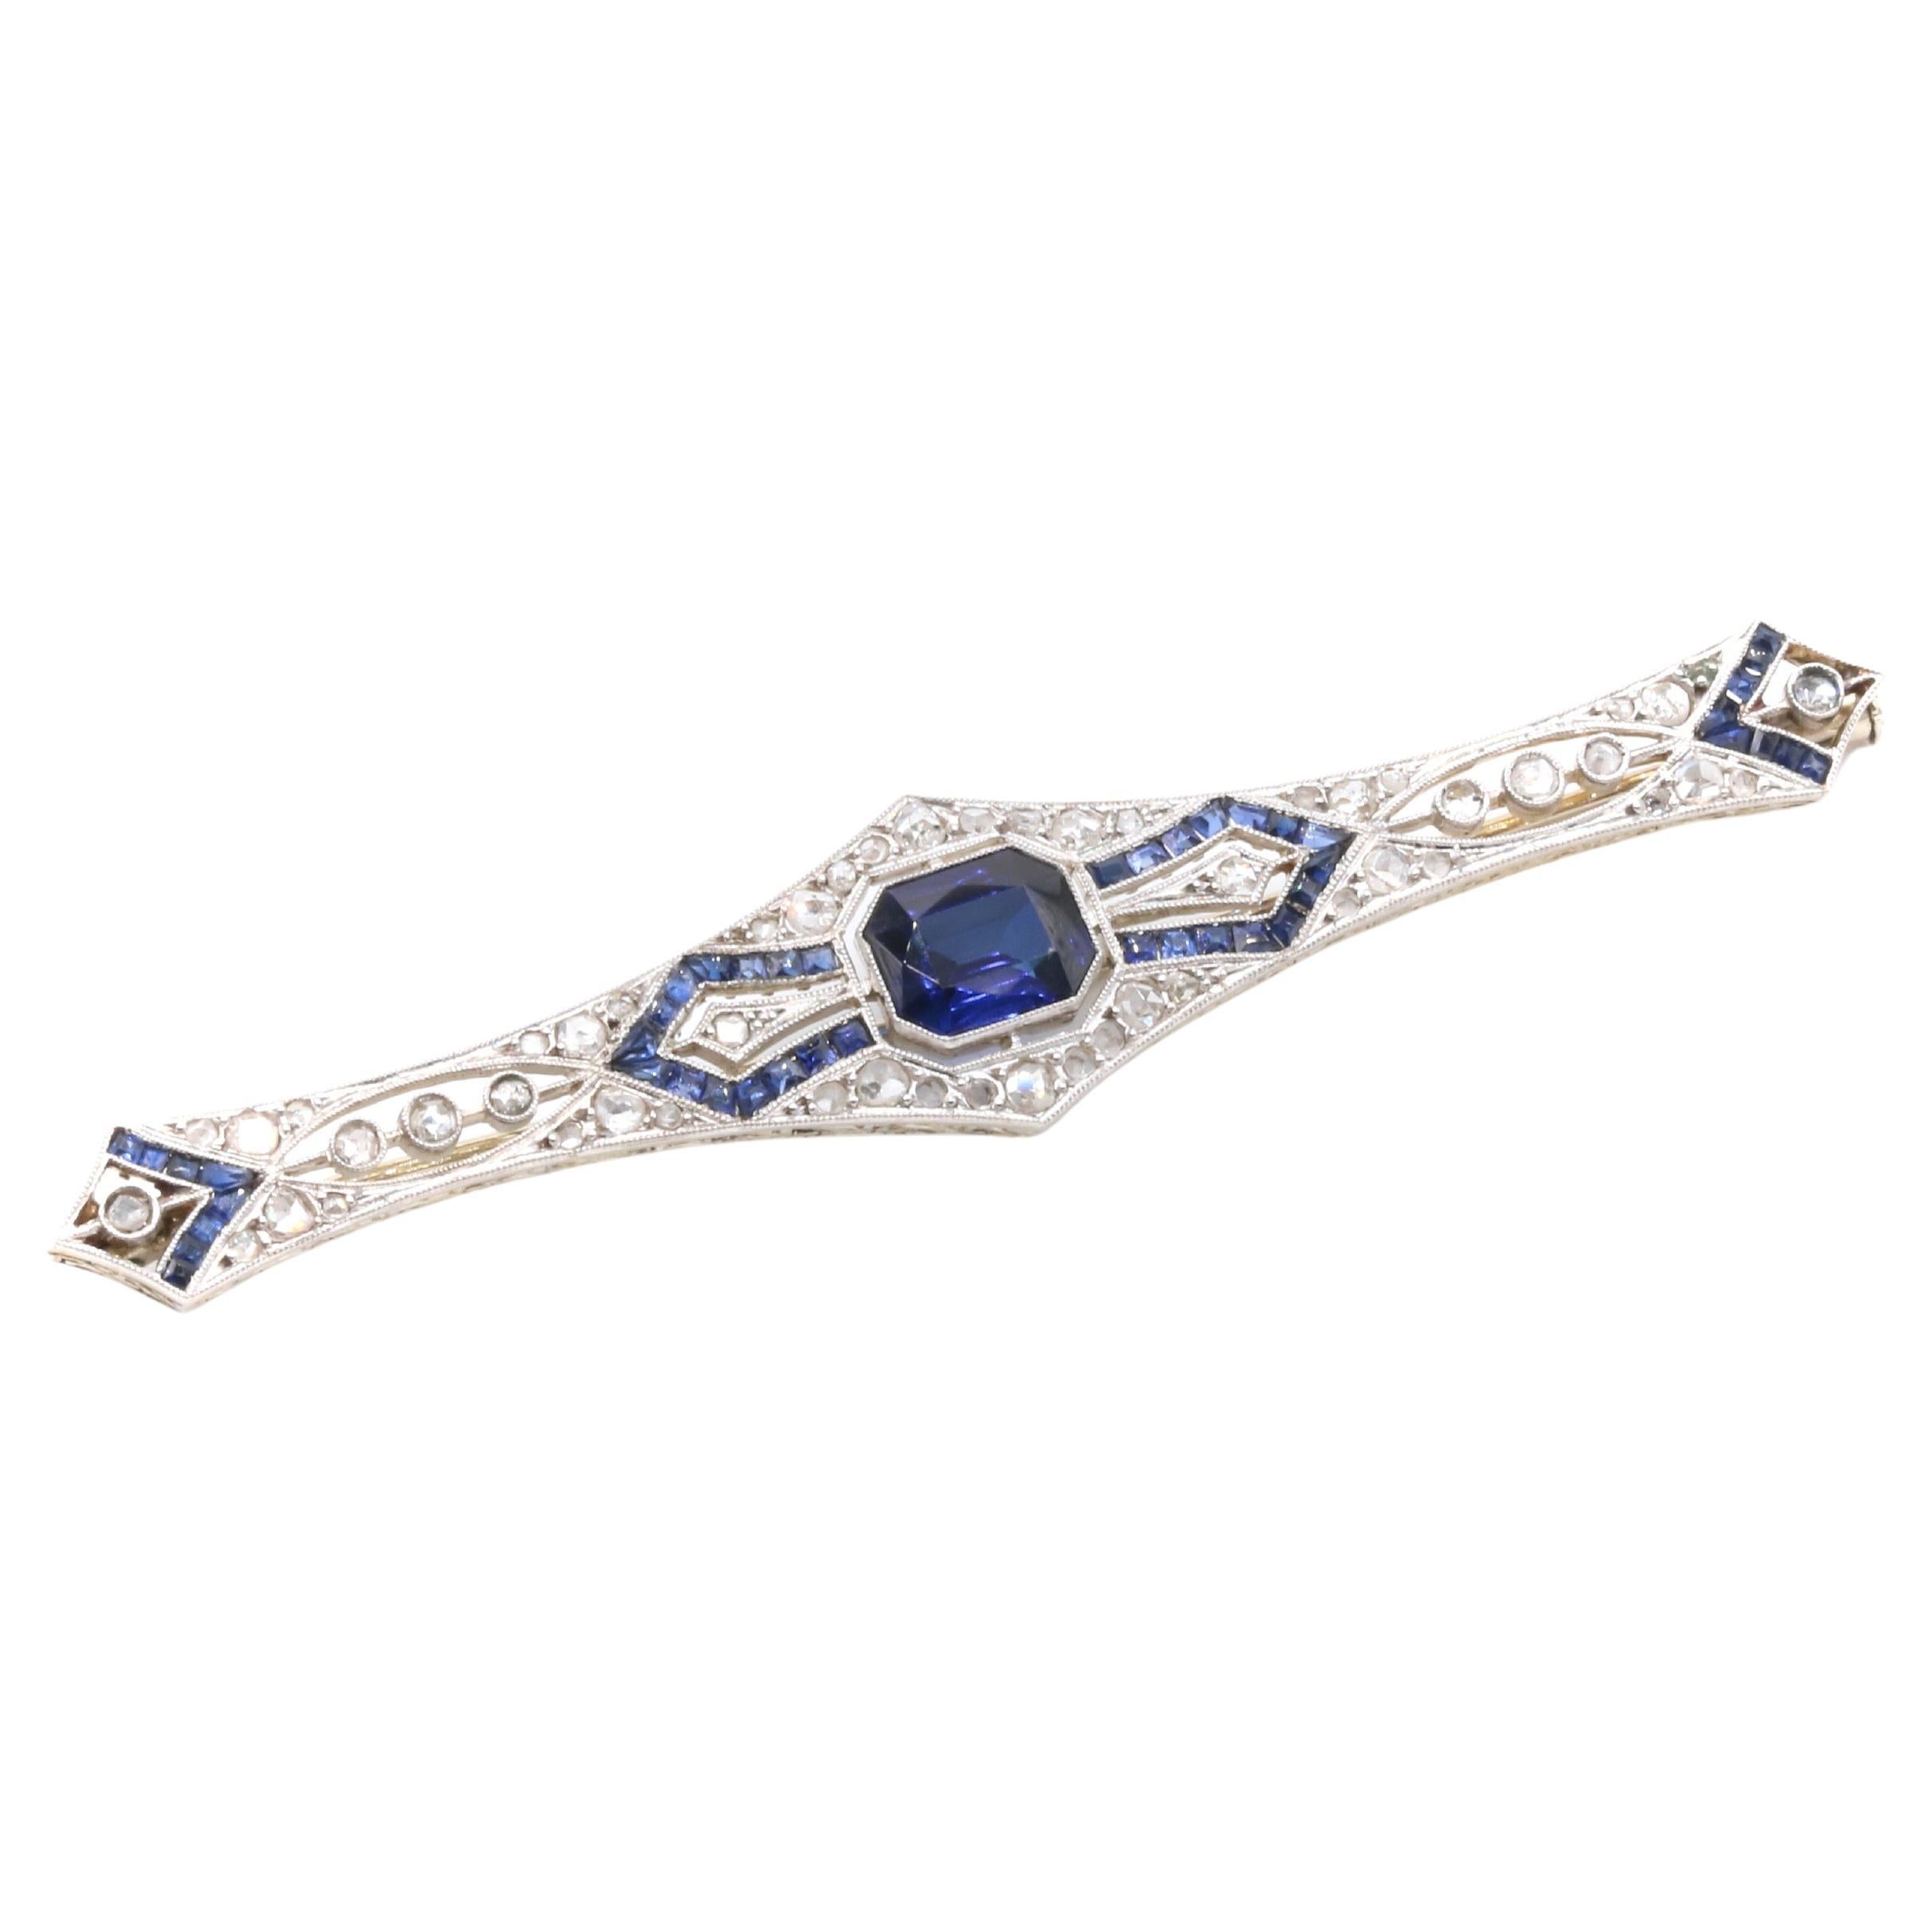 Art Deco 1920s French 18K Gold and Platinum 1.63tgw Sapphire and Diamond Brooch